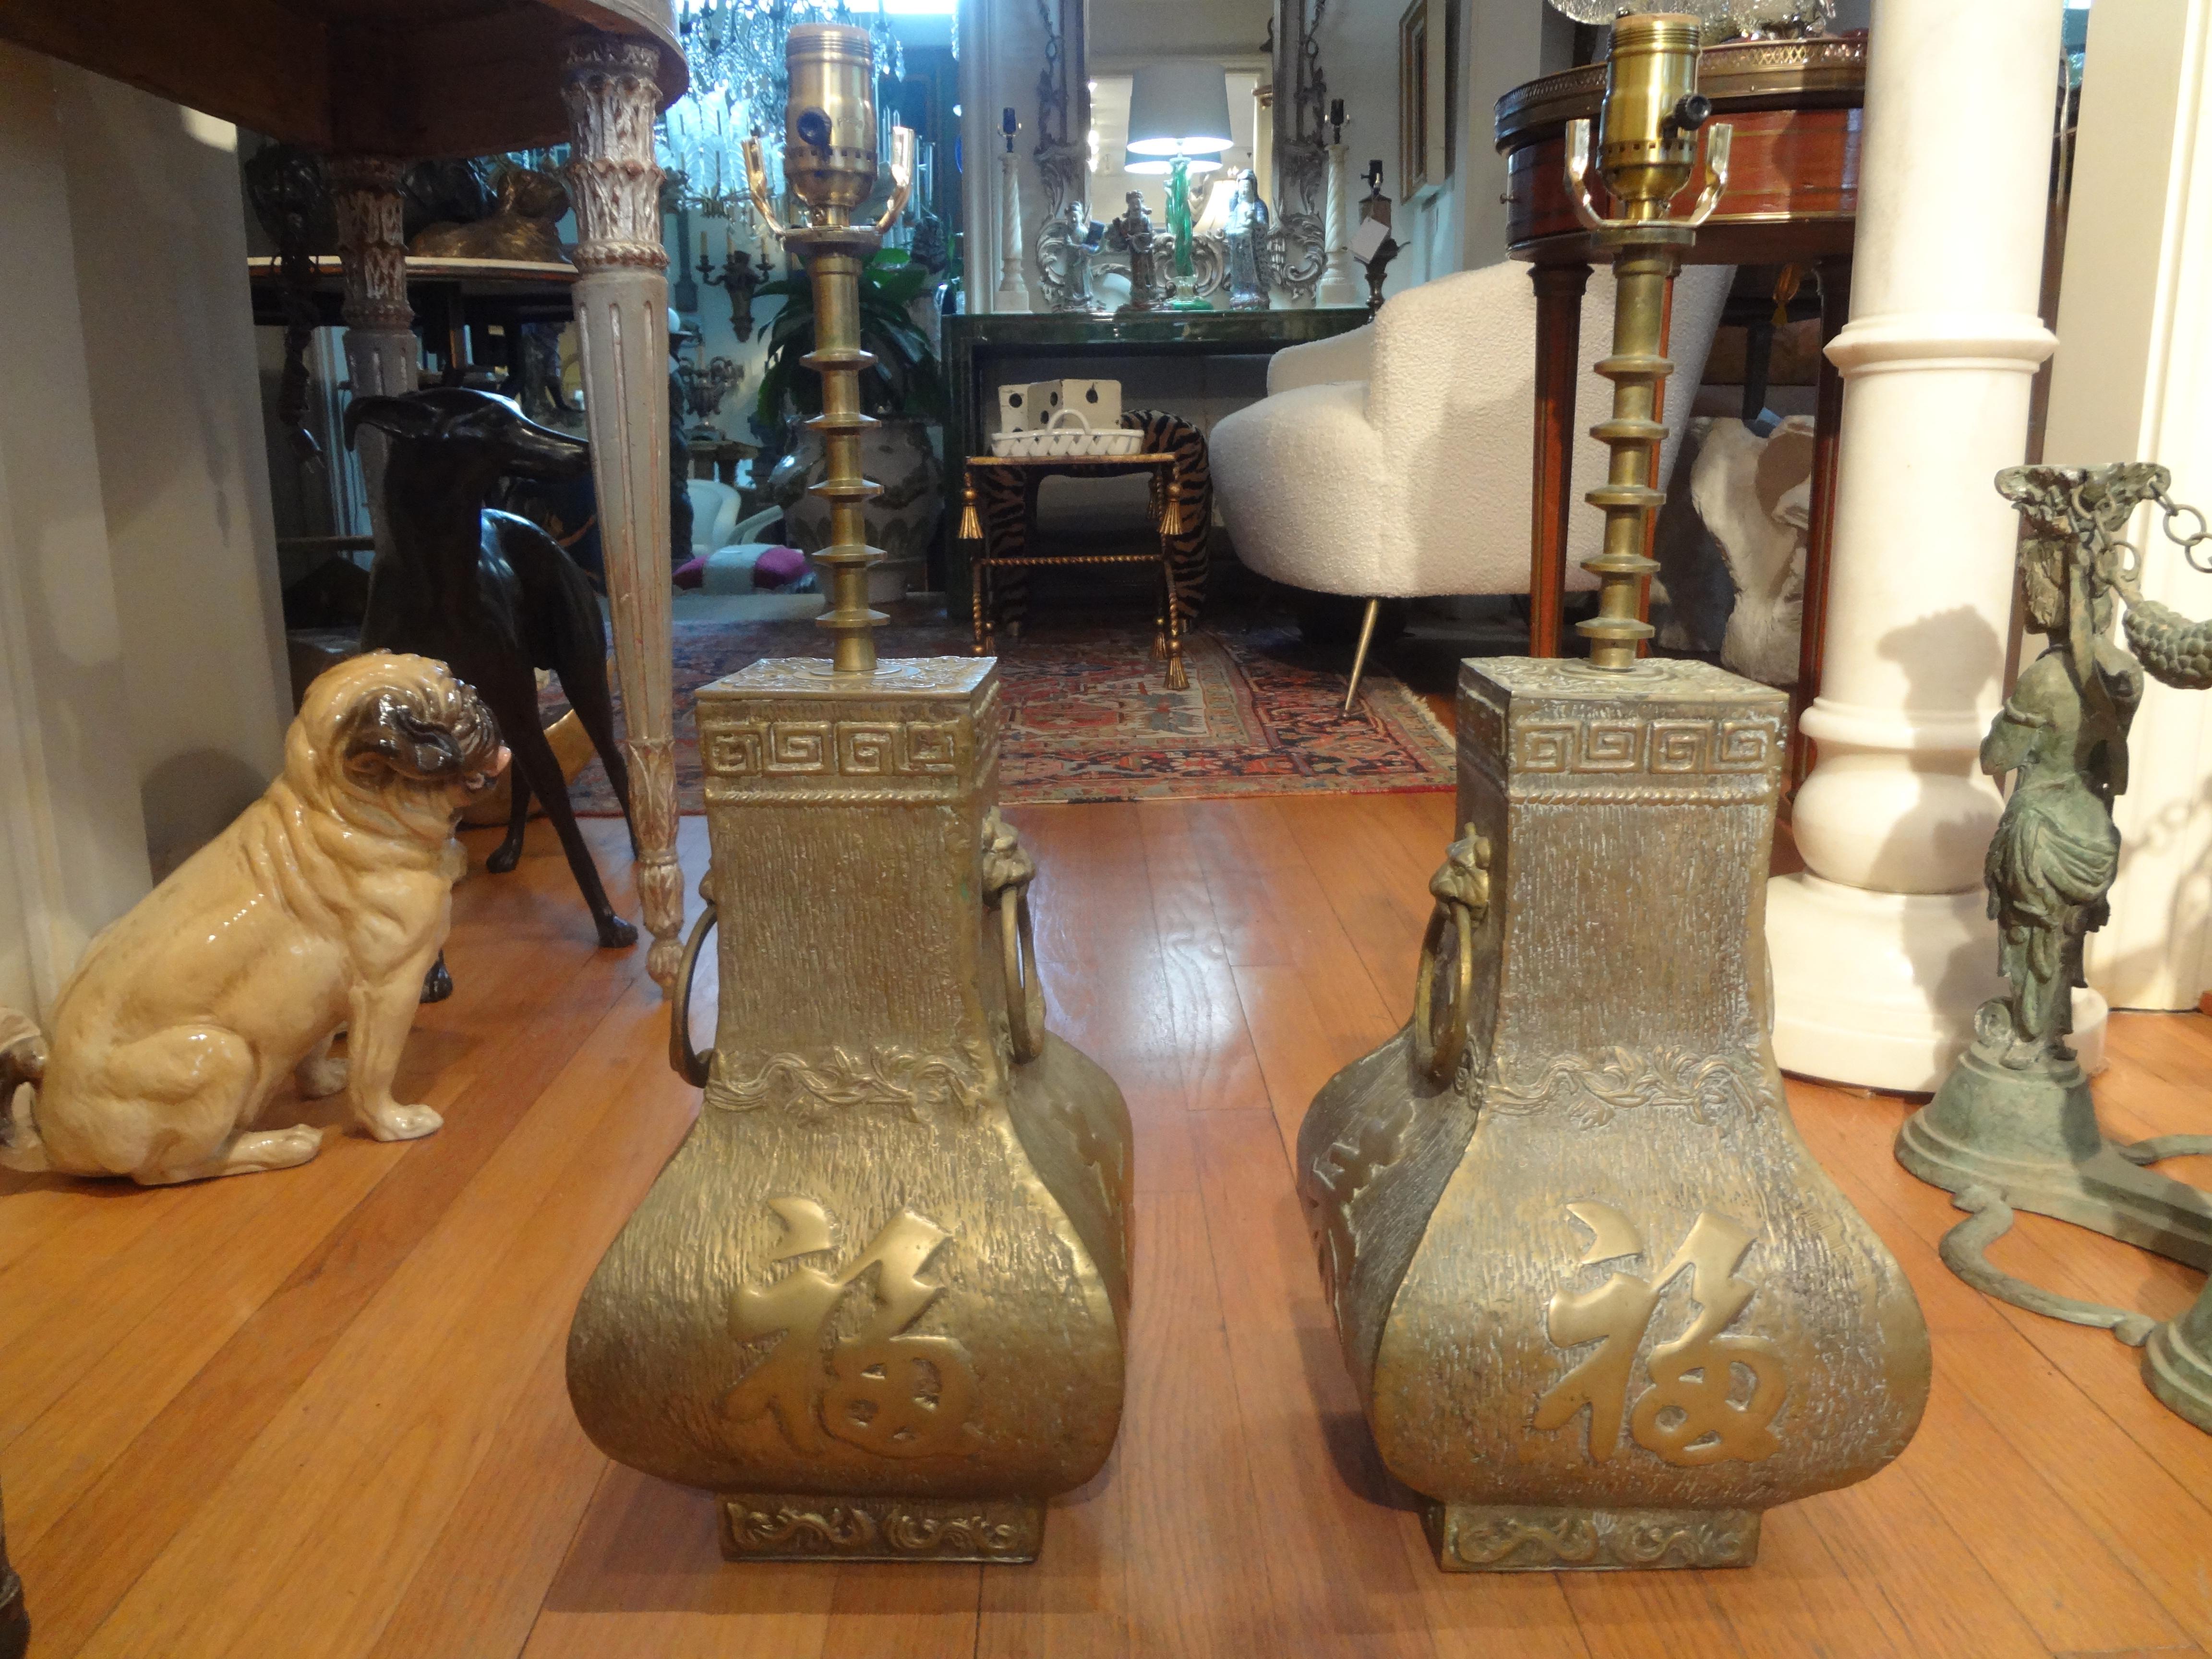 Pair of James Mont Asian Modern brass lamps. These stunning heavyweight Hollywood Regency brass lamps feature Chinese characters, Greek keys and lion heads handles. This great pair of midcentury brass lamps have been newly wired with new sockets and